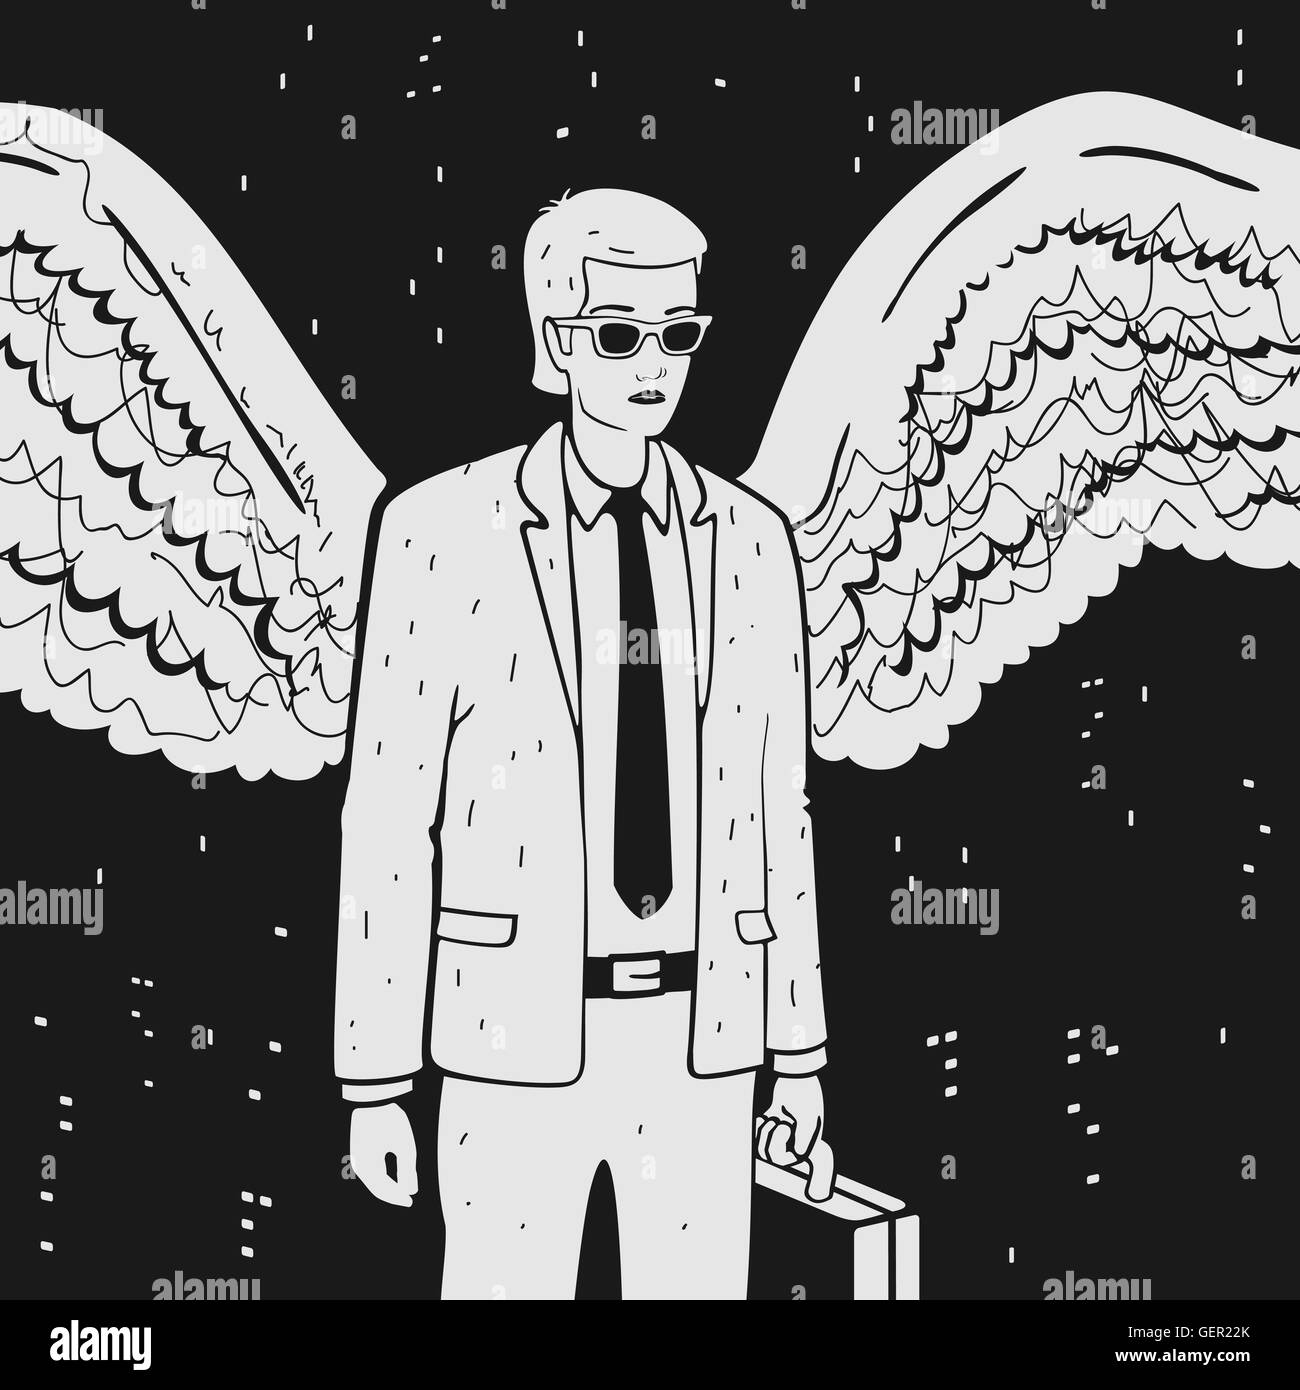 Man in a suit with wings Stock Vector